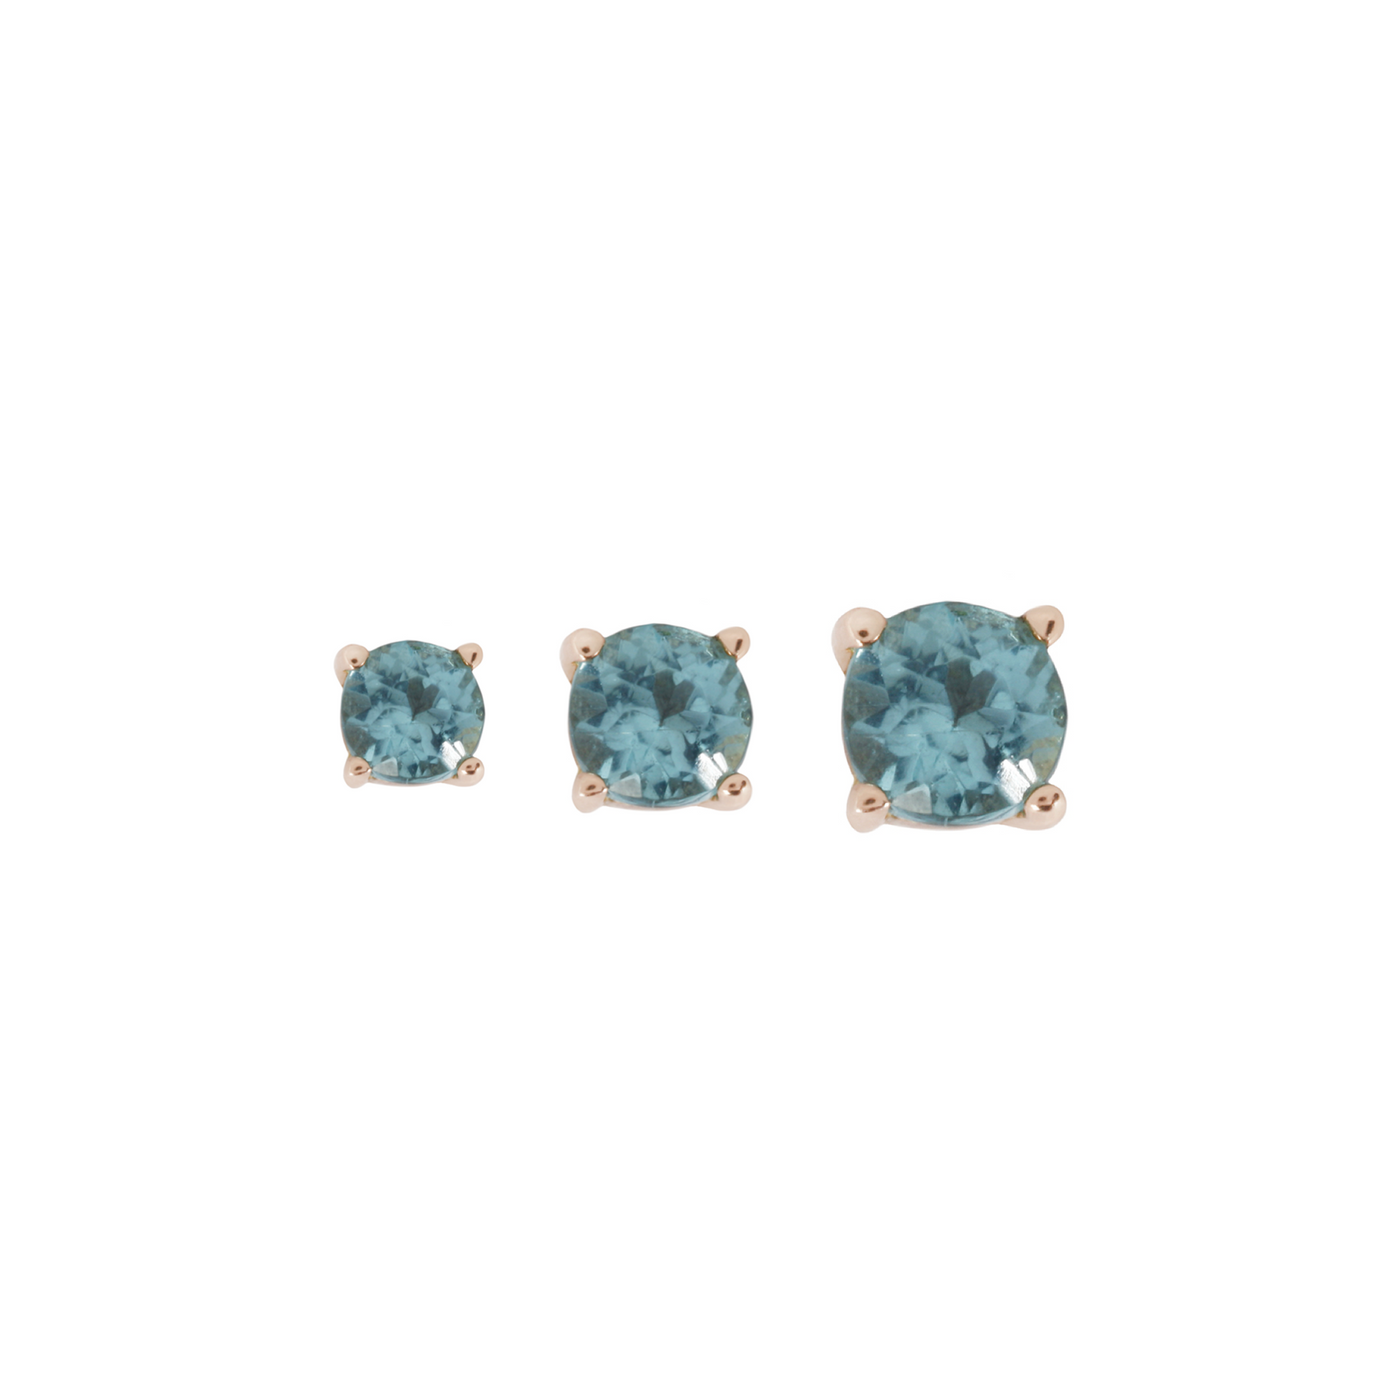 Solid Gold Apatite Earring - Piercing End Jewelry White Gold / 2.5mm